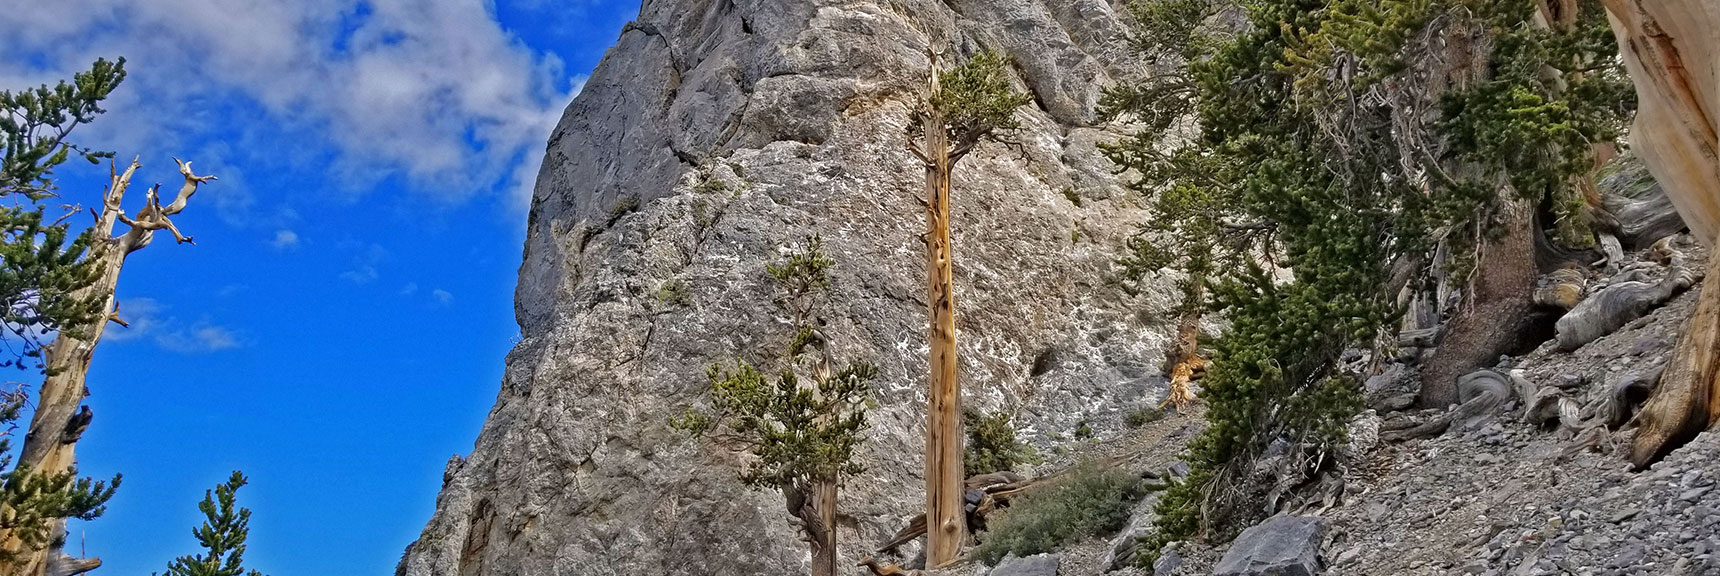 Steep Angle of Incline - Not As Steep as "The Slope of Death" Below | The Sisters South | Lee Canyon | Mt Charleston Wilderness | Spring Mountains, Nevada